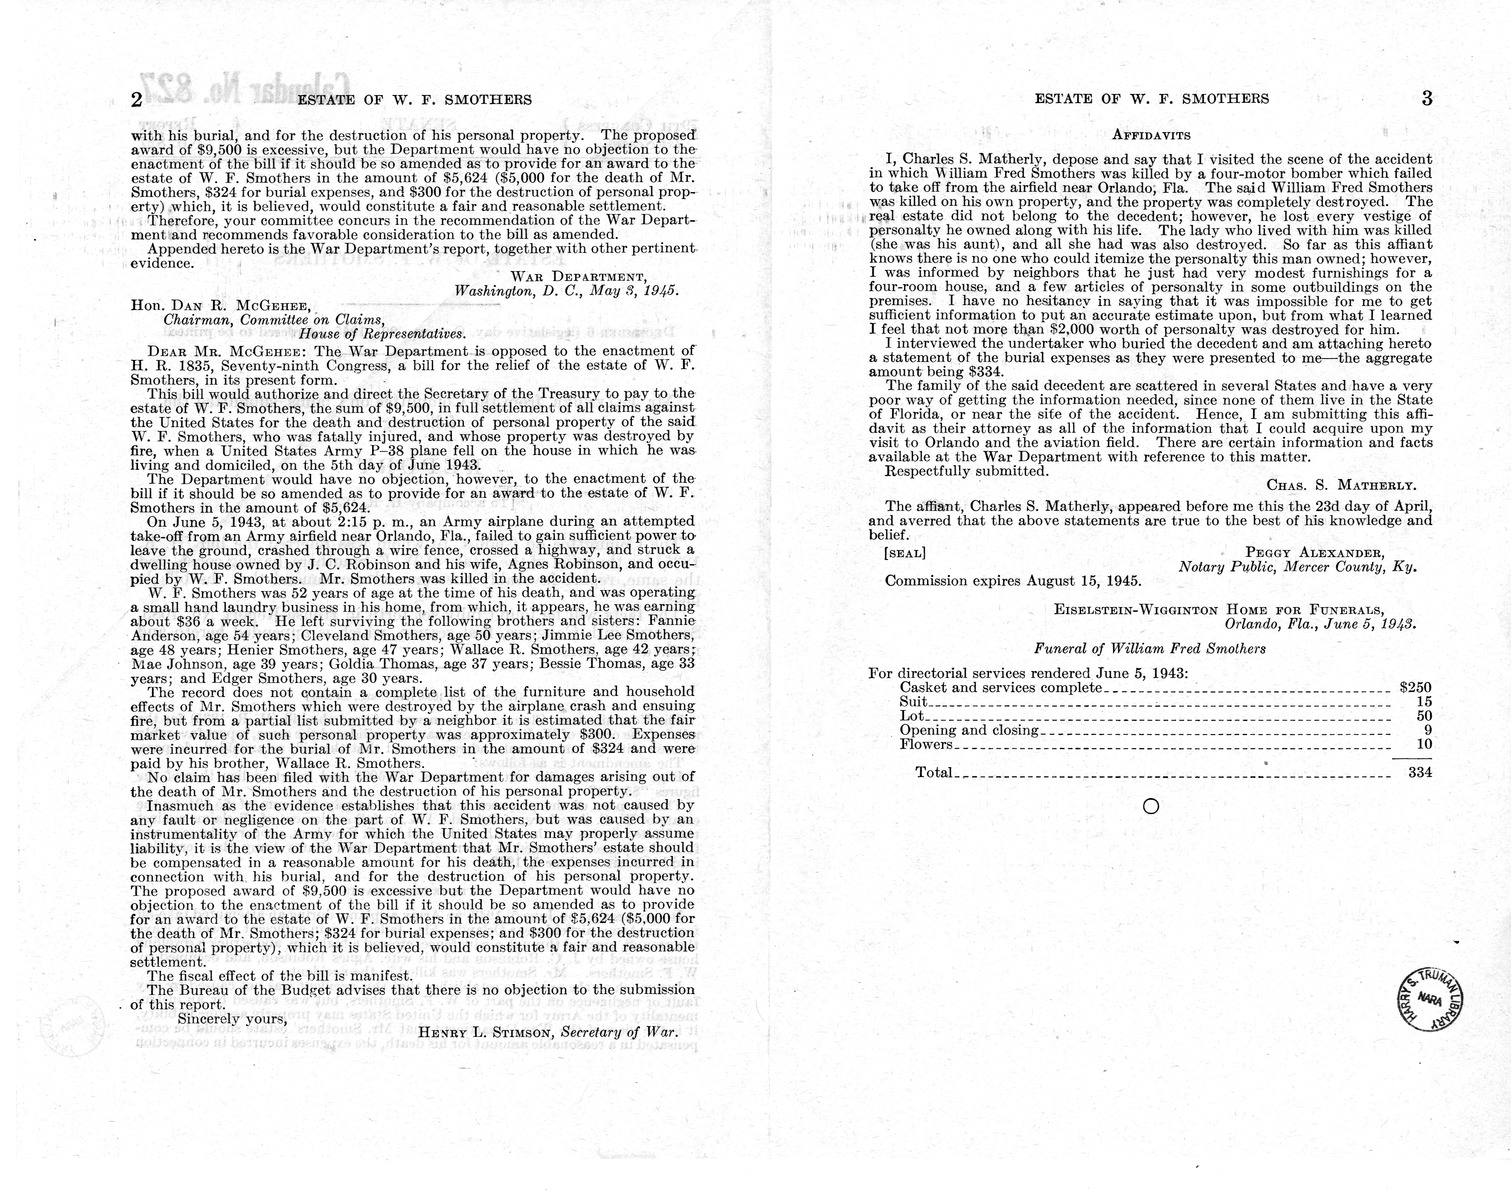 Memorandum from Frederick J. Bailey to M. C. Latta, H.R. 1835, For the Relief of the Estate of W. F. Smothers, with Attachments